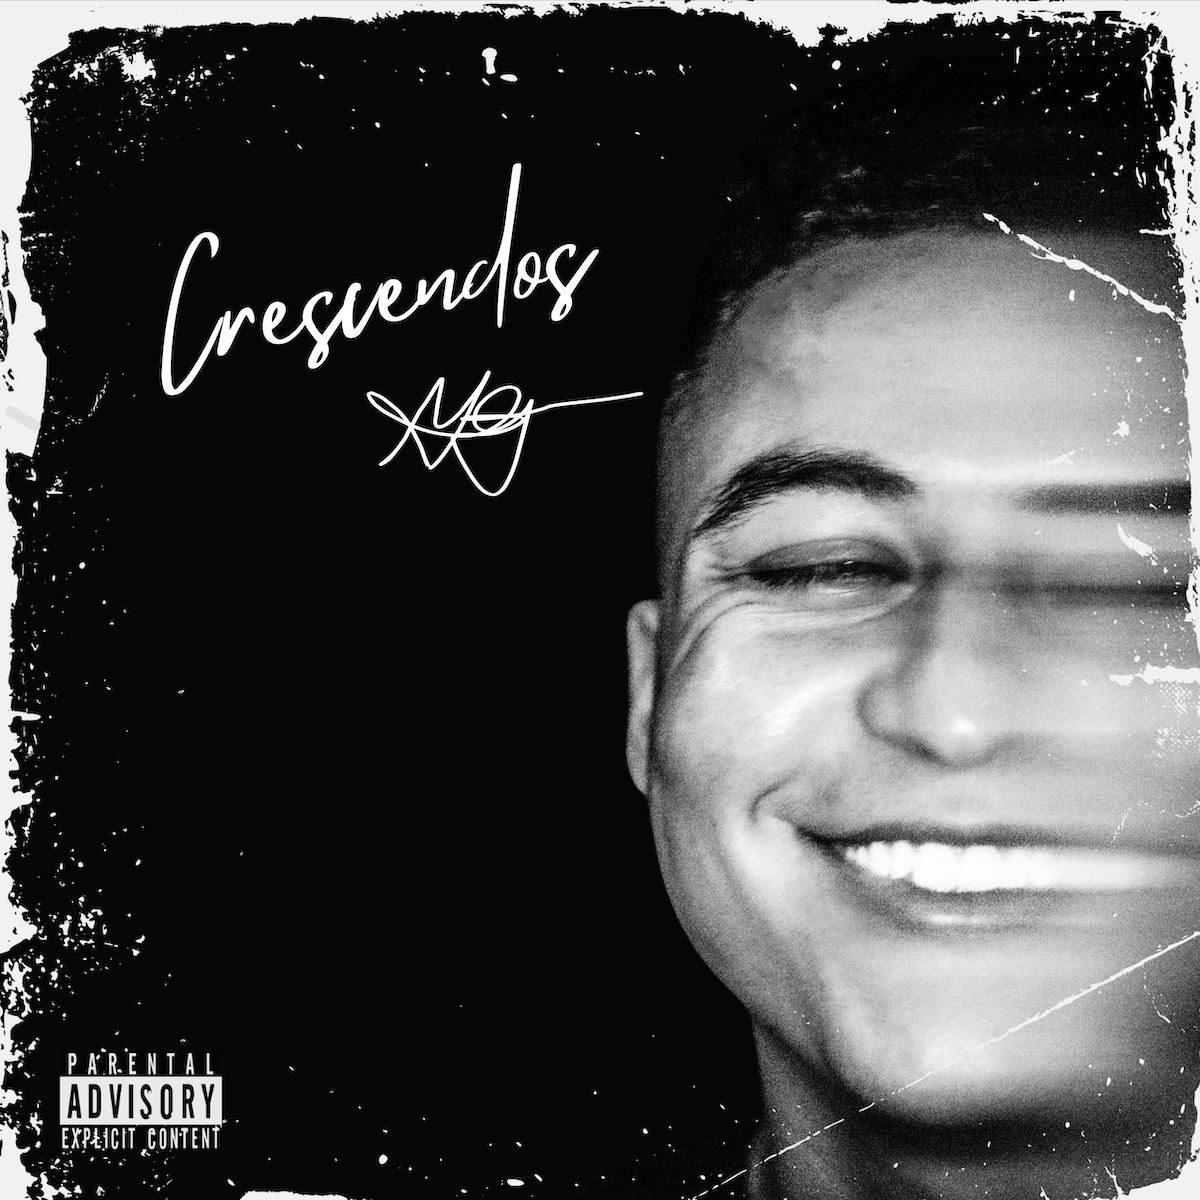 Miles Gaines Drops “Crescendos” EP with Hit Tracks “Laughing to the Bank” and “WESTSIDE” – 1 Million Streams in 48 Hours!